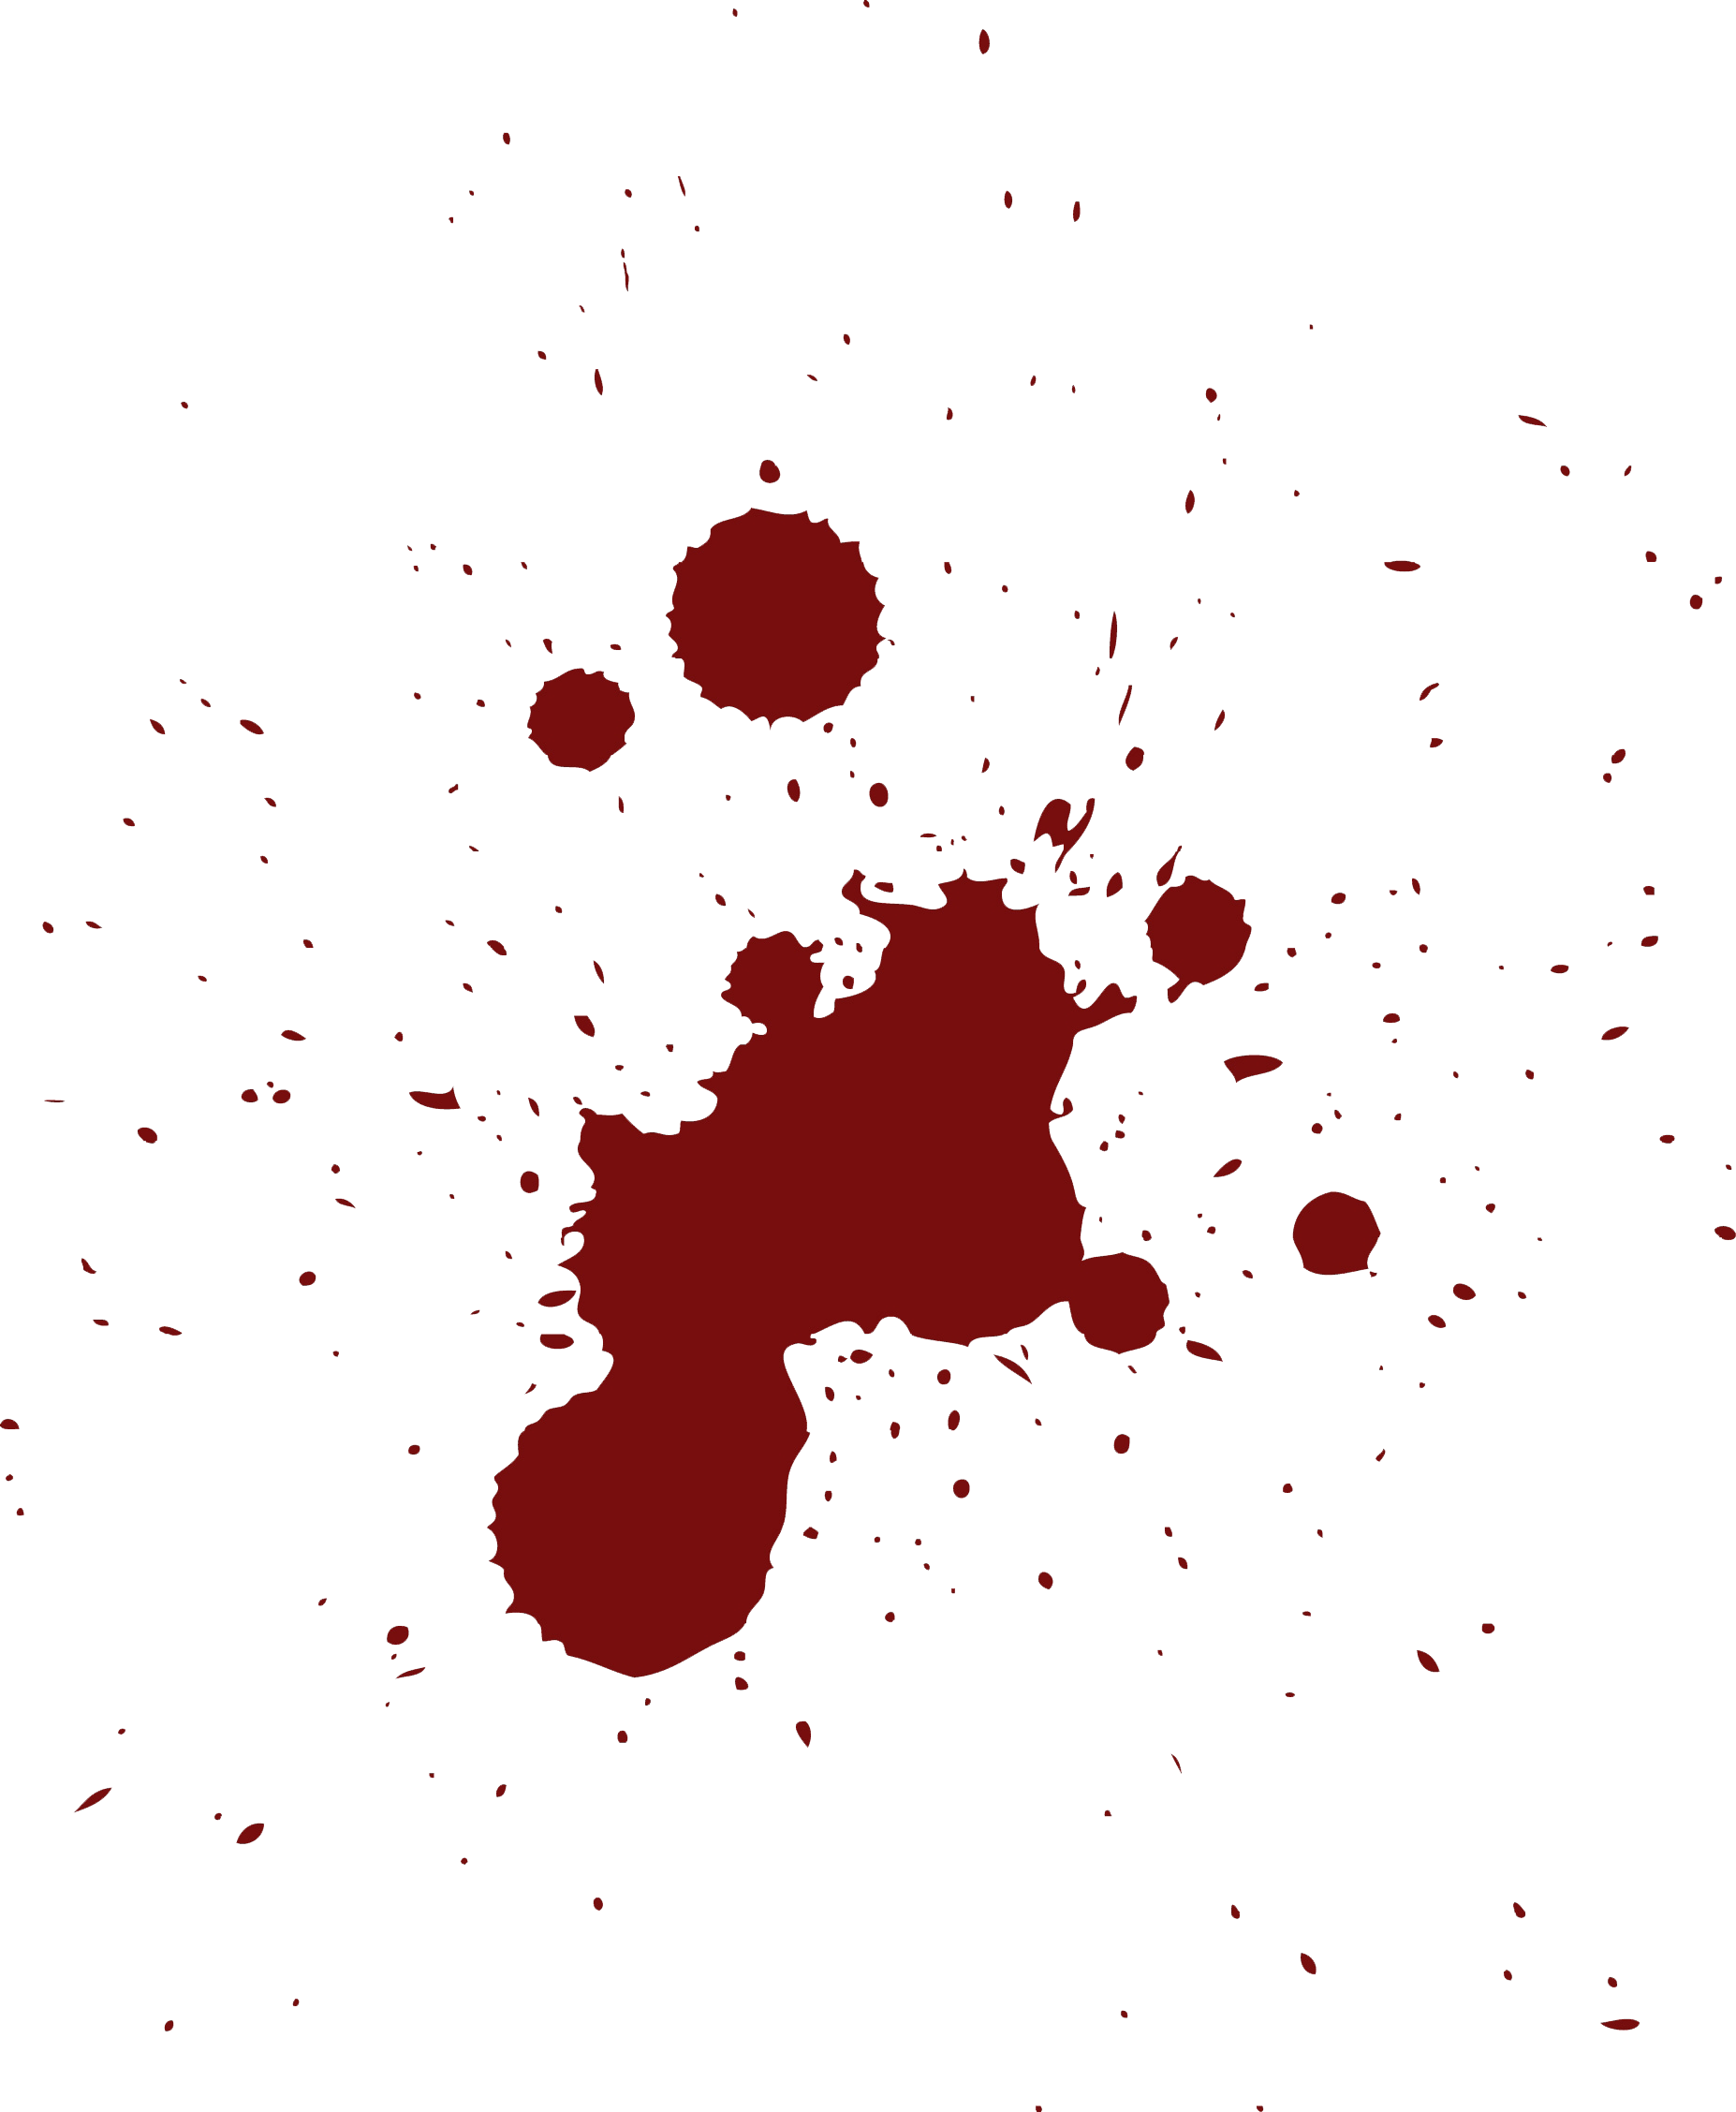 T-shirt Bloodstain pattern analysis, Blood In, red stain screenshot, color,  red png